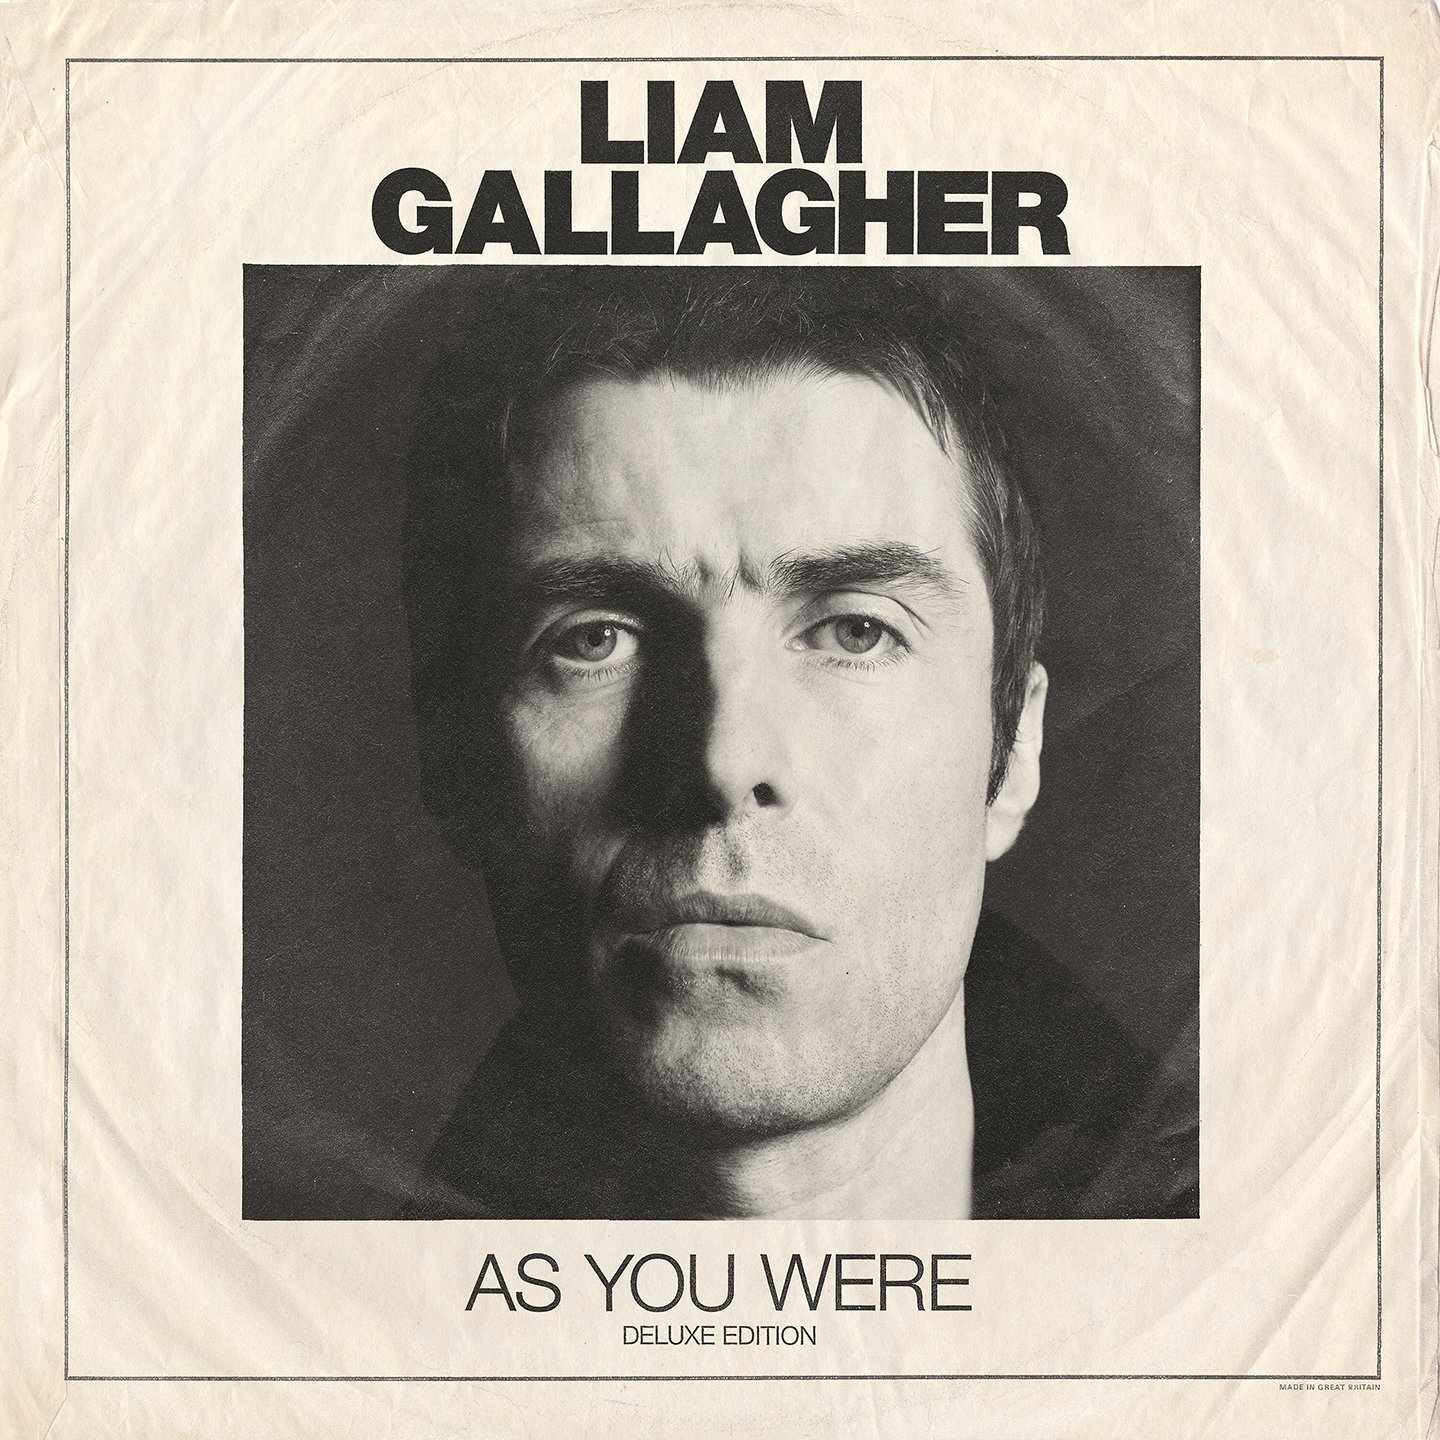 Liam Gallagher – As You Were {Deluxe Edition} (2017) [HDTracks FLAC 24bit/44,1kHz]